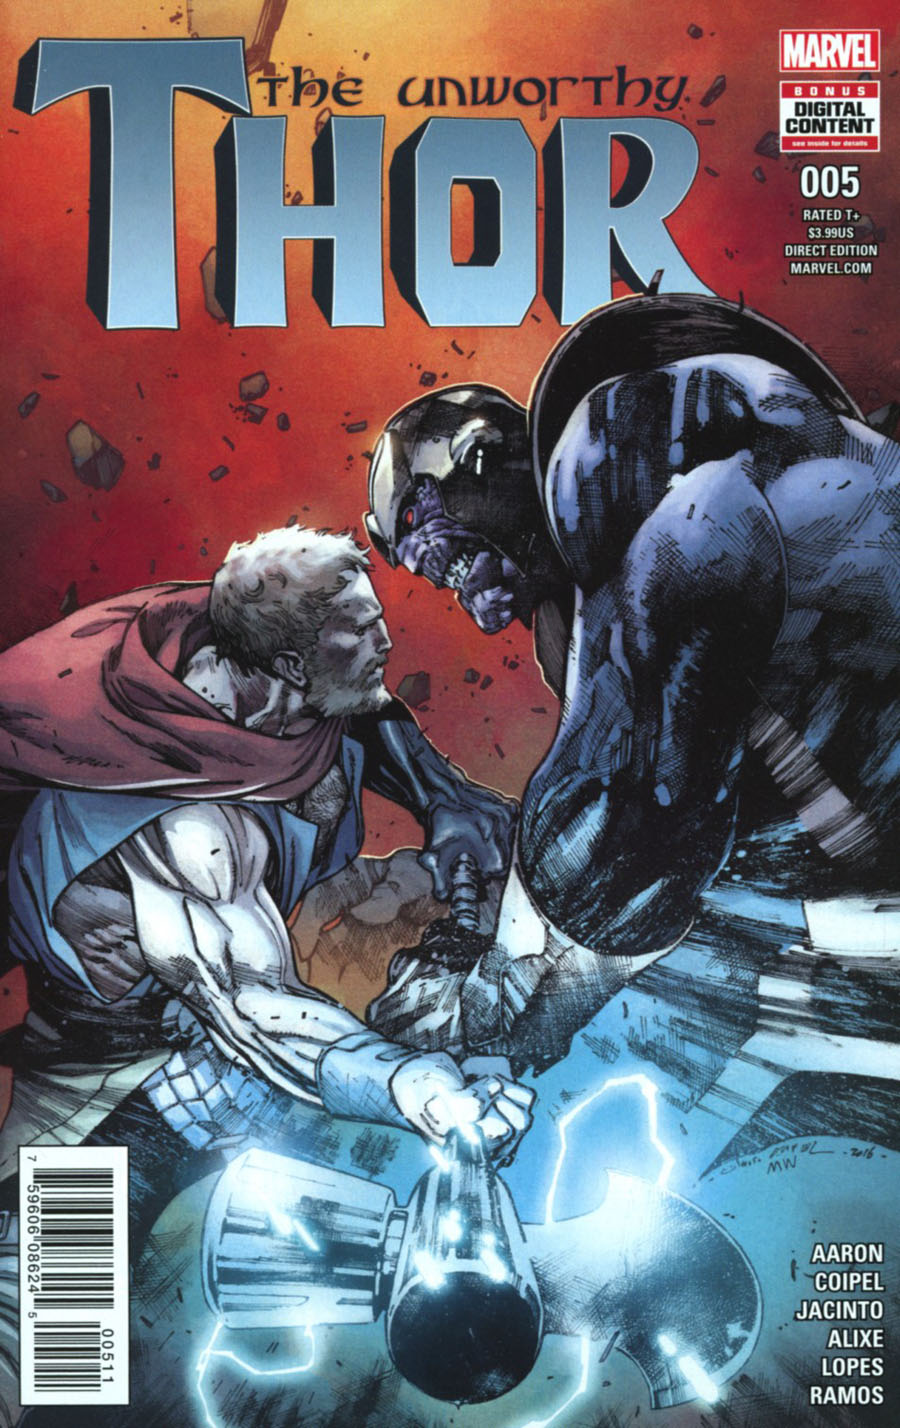 Unworthy Thor #5 Cover A Regular Olivier Coipel Cover